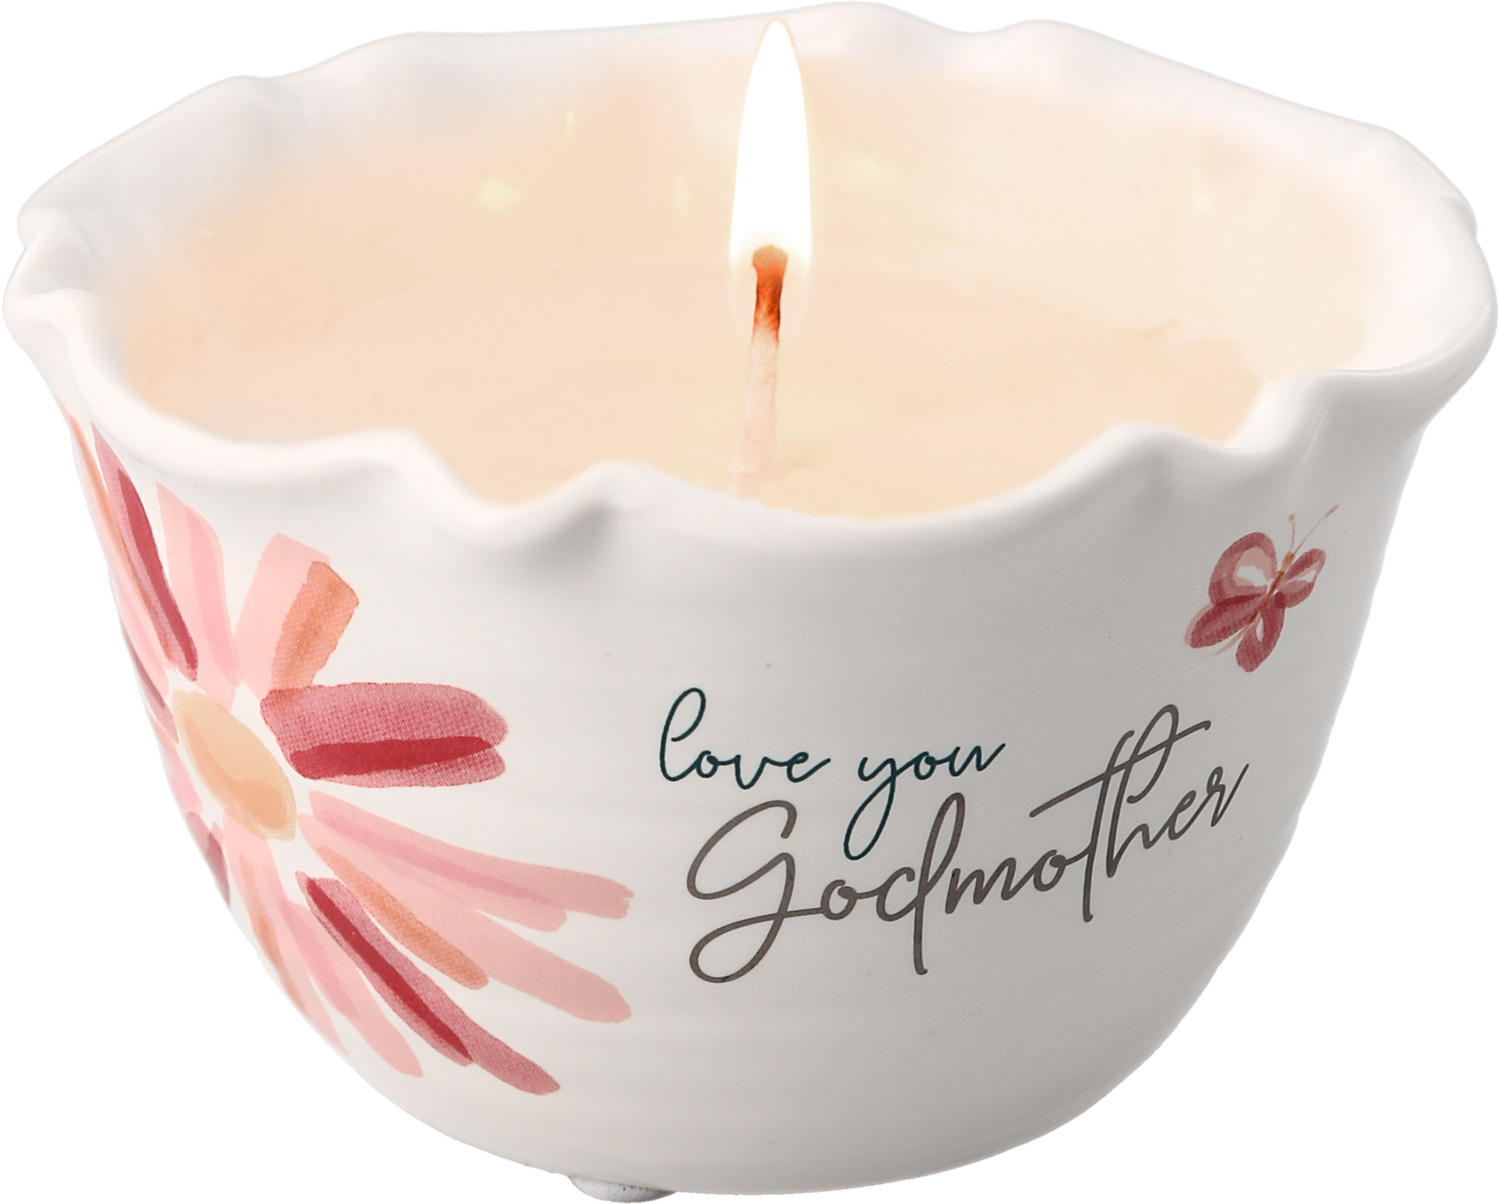 Godmother by Rosy Heart - Godmother - 9 oz - 100% Soy Wax Candle
Scent: Tranquility